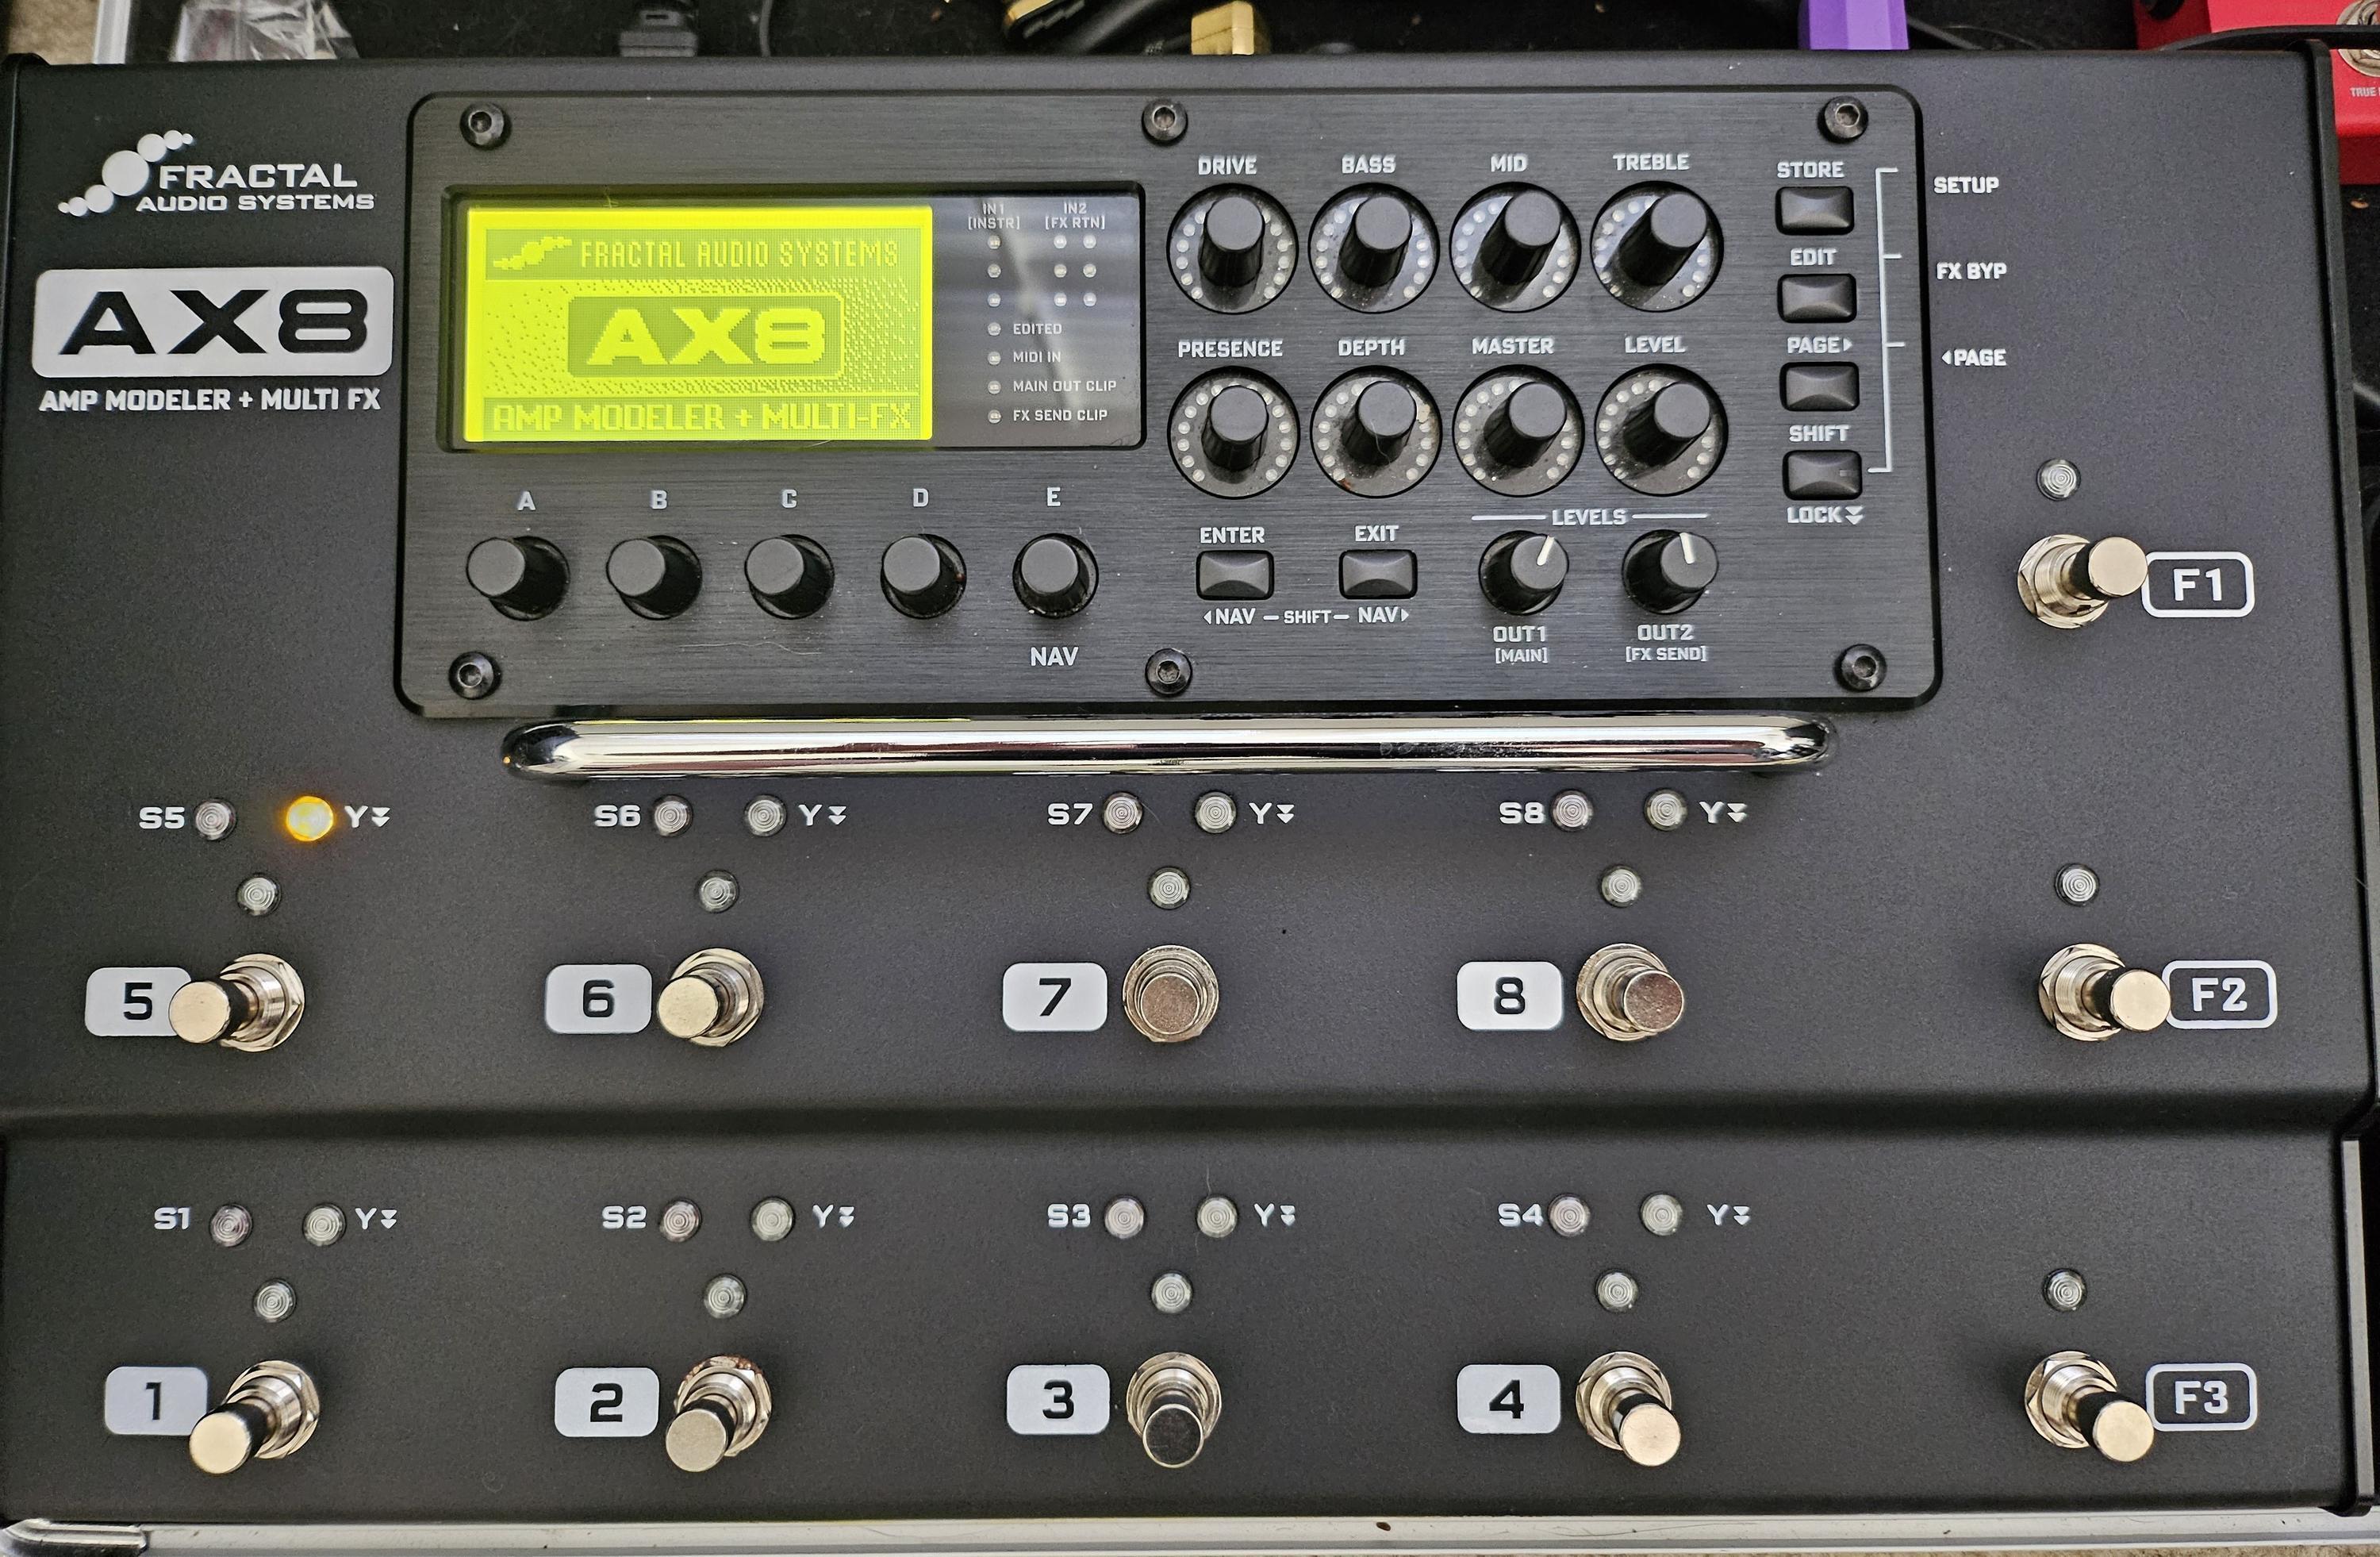 Used Fractal Audio Systems AX8 Amp Modeler/Multi-FX Processor